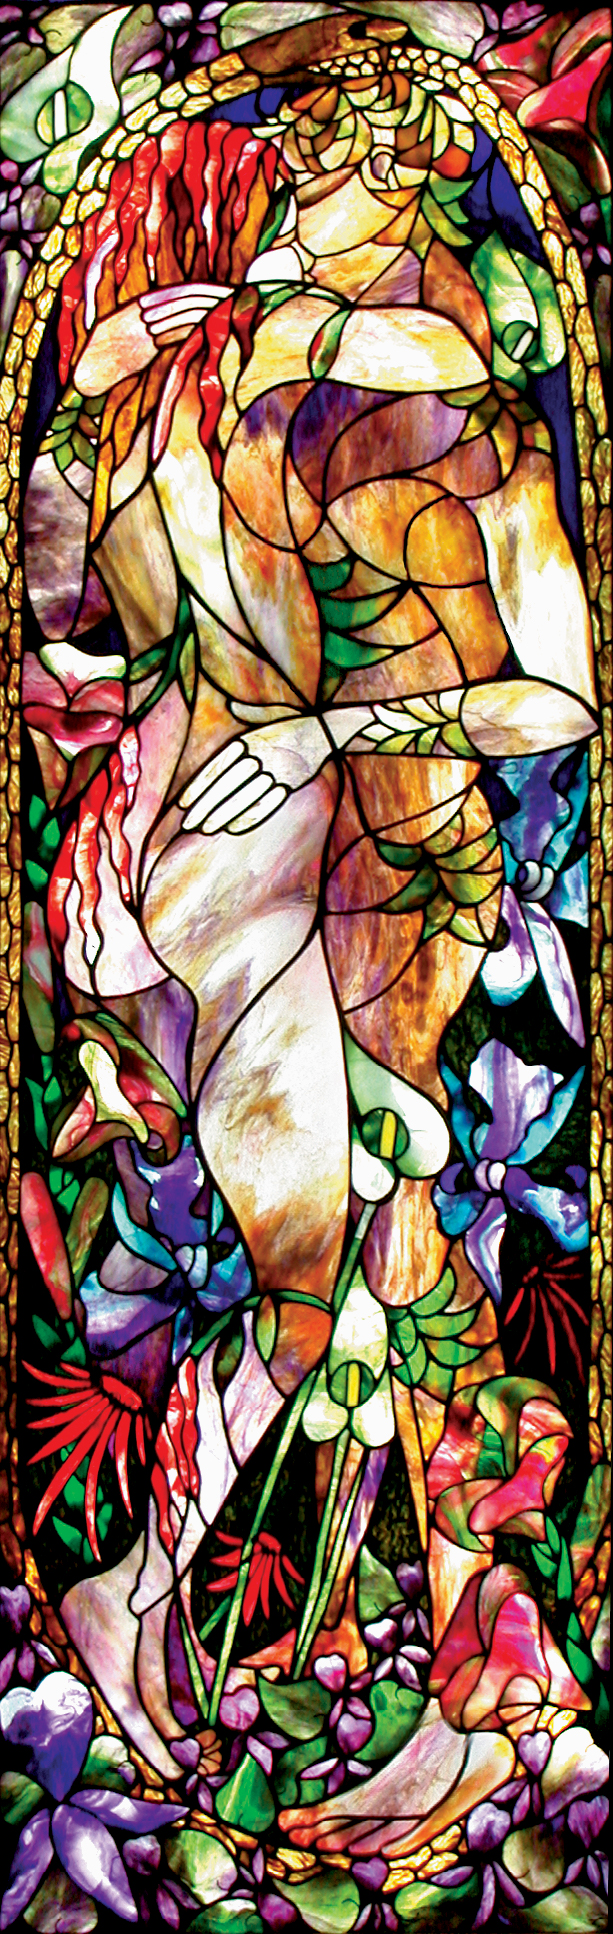 lilith and adam stained glass by Jezebel